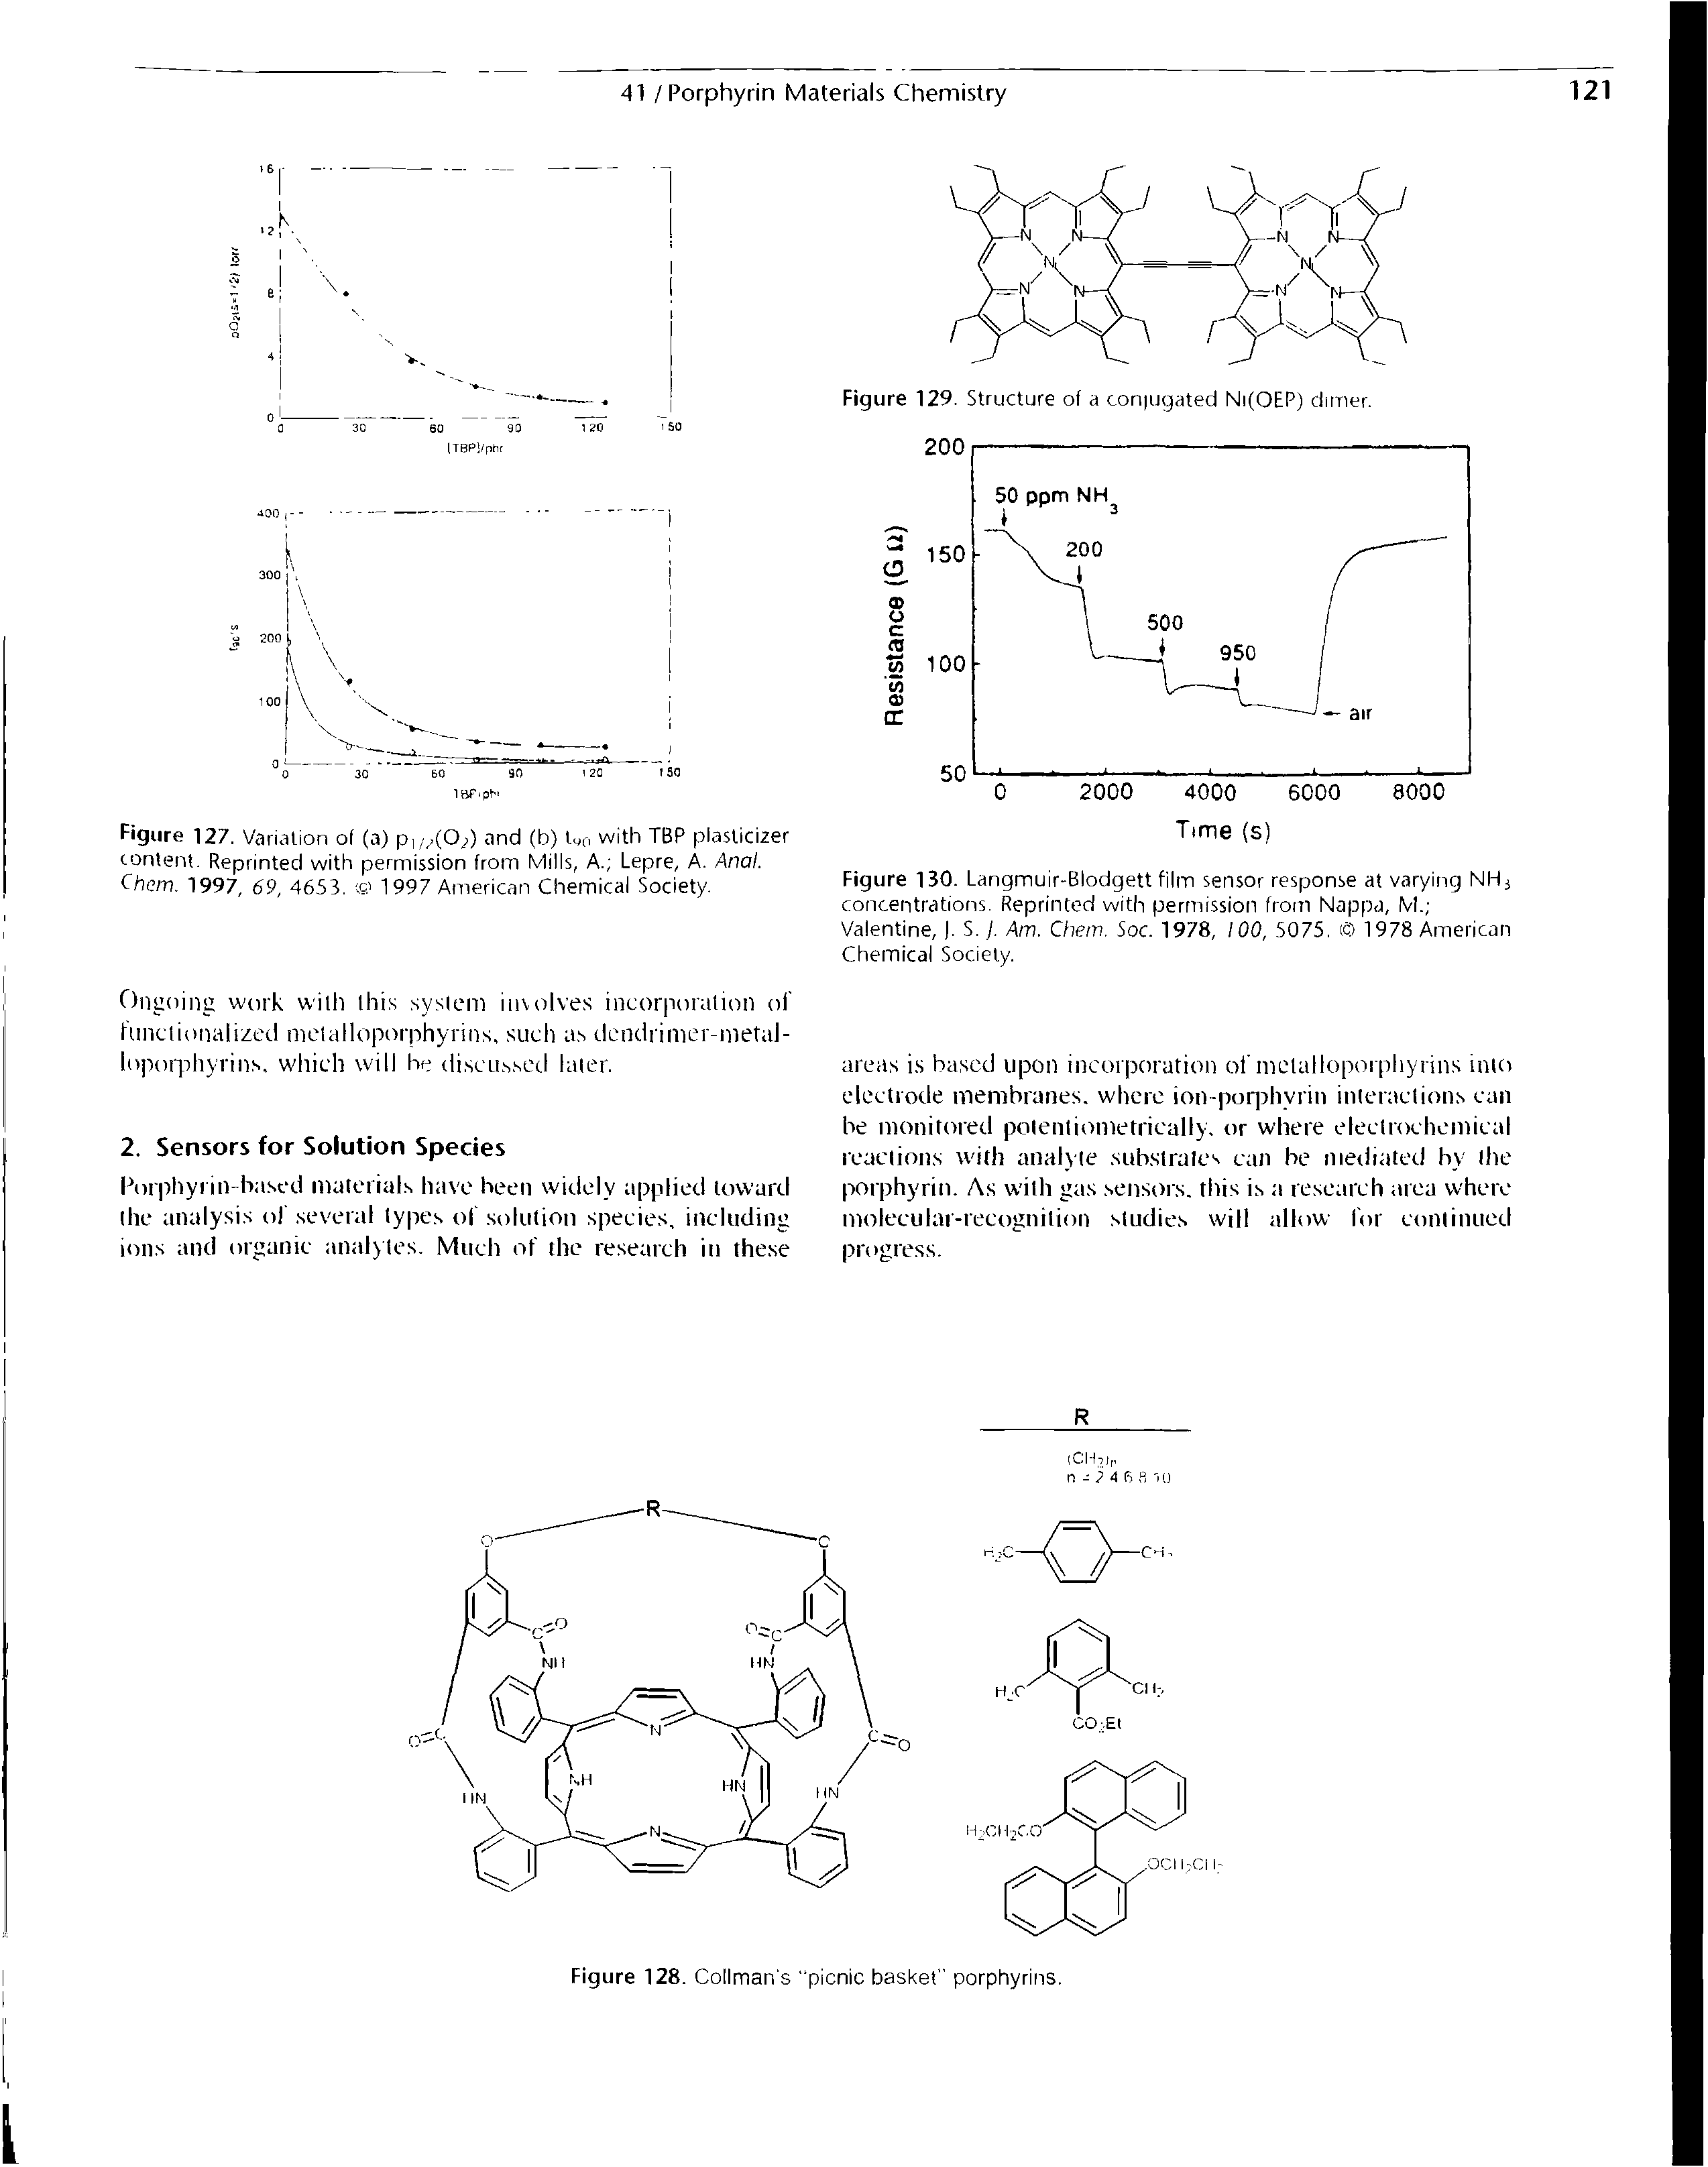 Figure 130. Langmuir-Blodgett film sensor response at varying NHj concentrations. Reprinted with permission from Nappa, M. Valentine,. S. /. Am. Chem. Soc. 1978, 100, 5075. 1978 American Chemical Society.